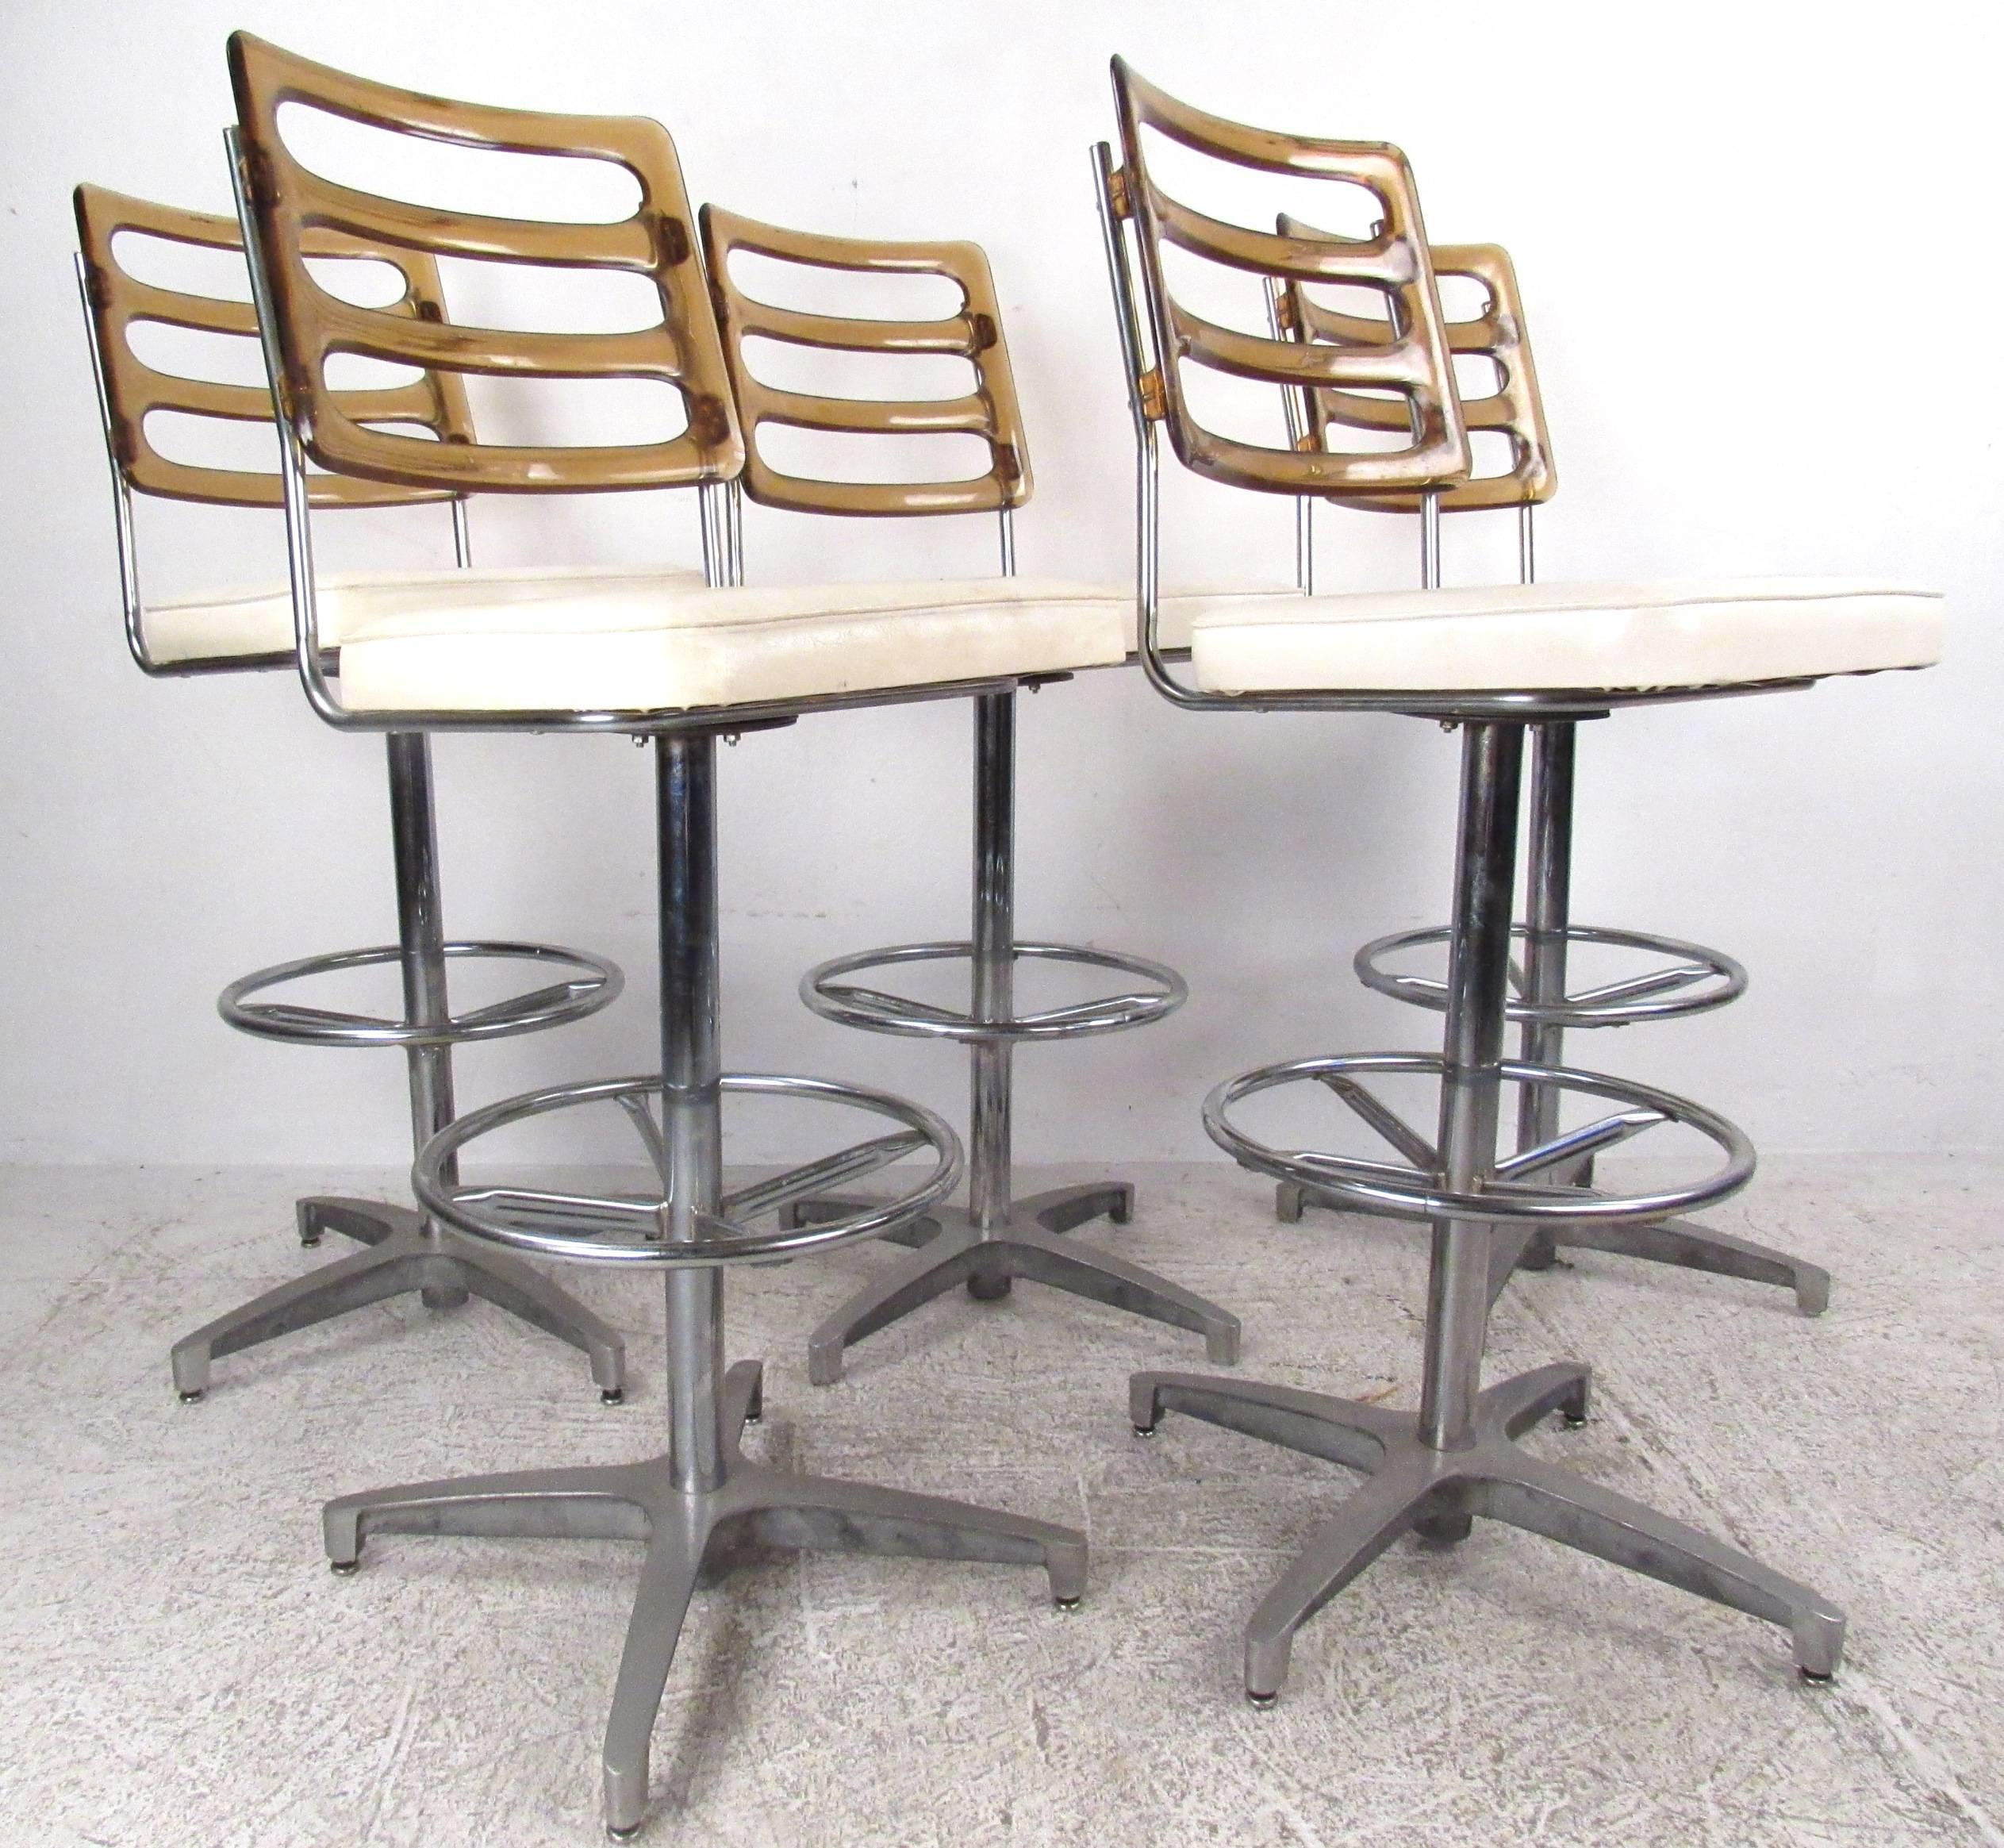 This beautiful vintage set of five Lucite and vinyl bar stools features an aluminum swivel base with a round chrome foot rest. The unique tinted Lucite back rest adds style and grace in any setting. Please confirm item location with dealer (NY or